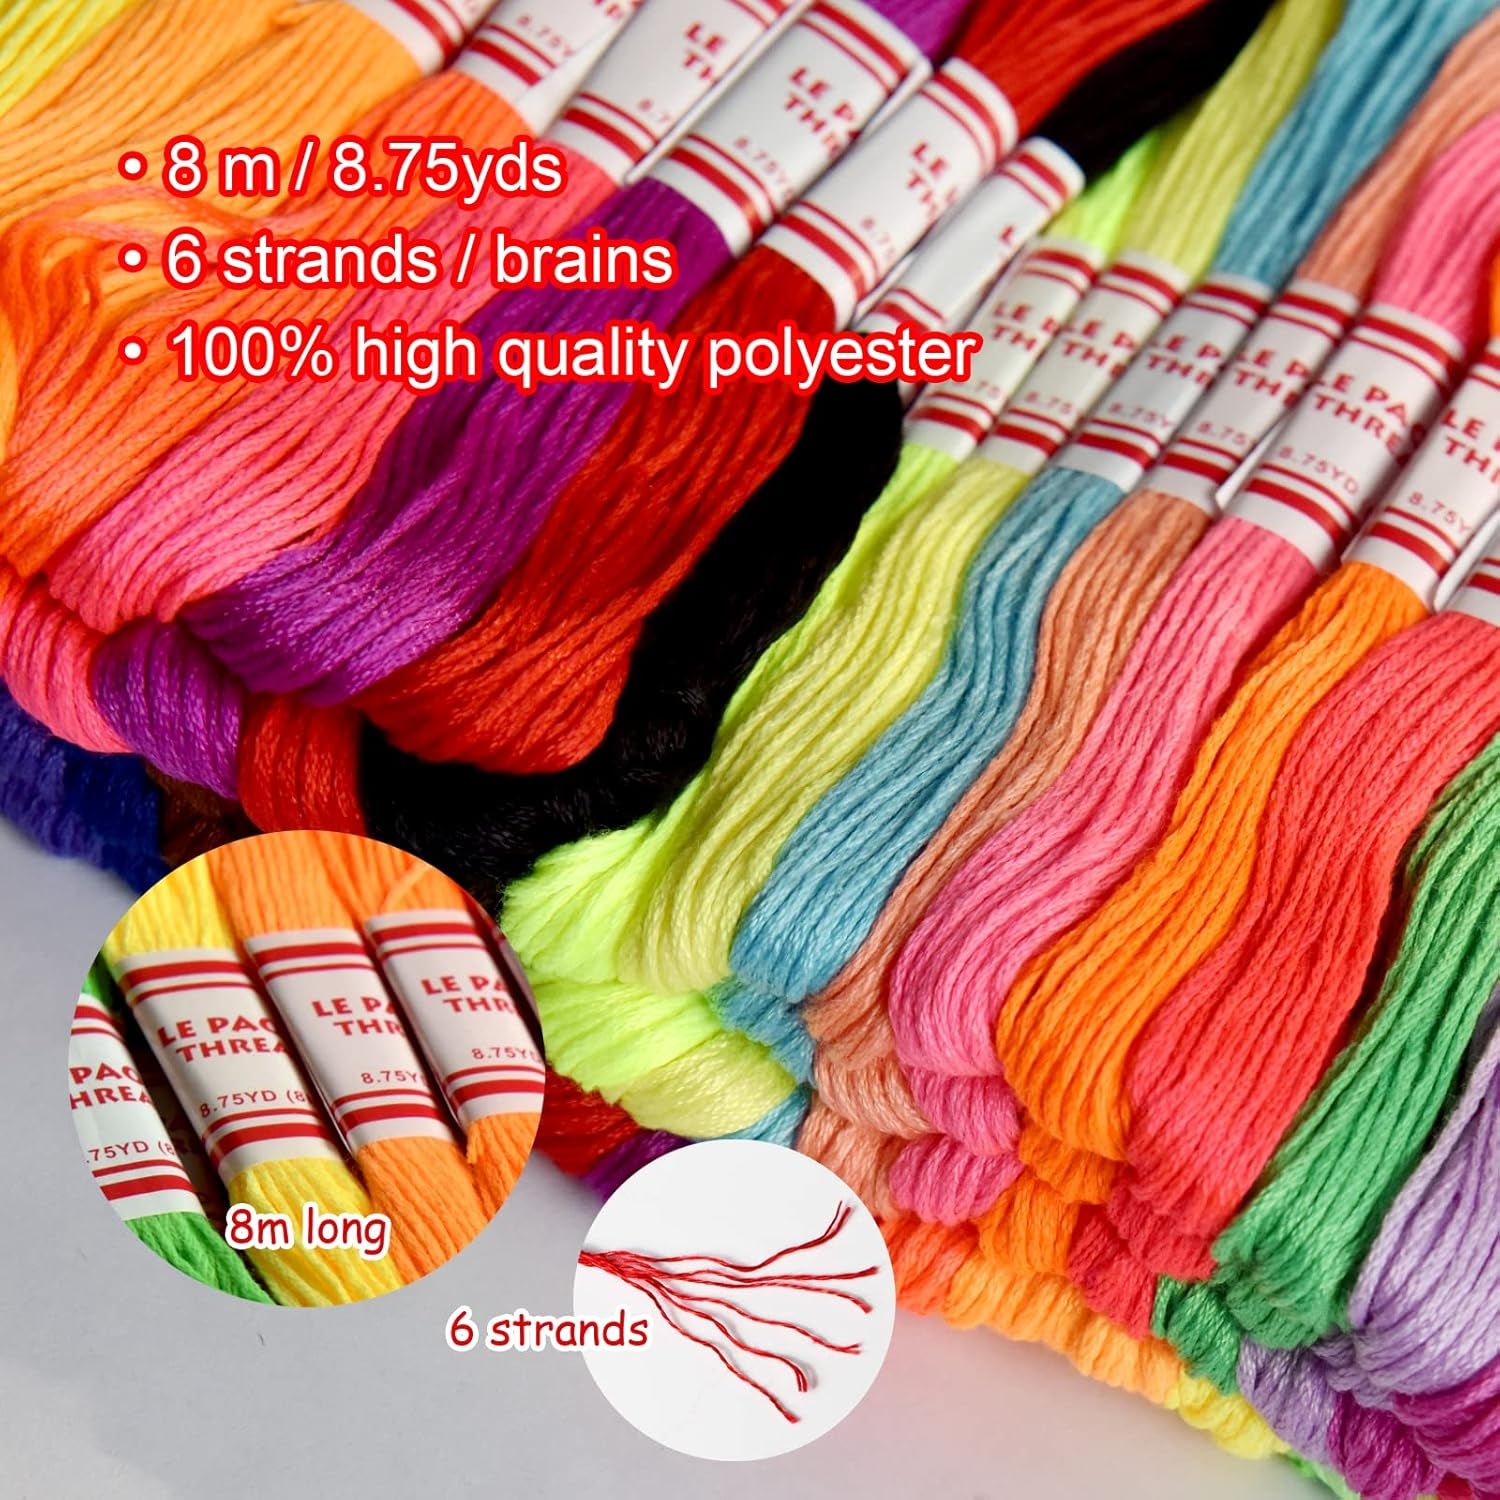 Embroidery Floss Rainbow Color 109 Skeins per Pack Cross Stitch Threads Friendship Bracelets Floss Crafts Floss with 3 Weaved Plate（105 Pcs Embroidery Floss +4 Metallic Embroidery Thread